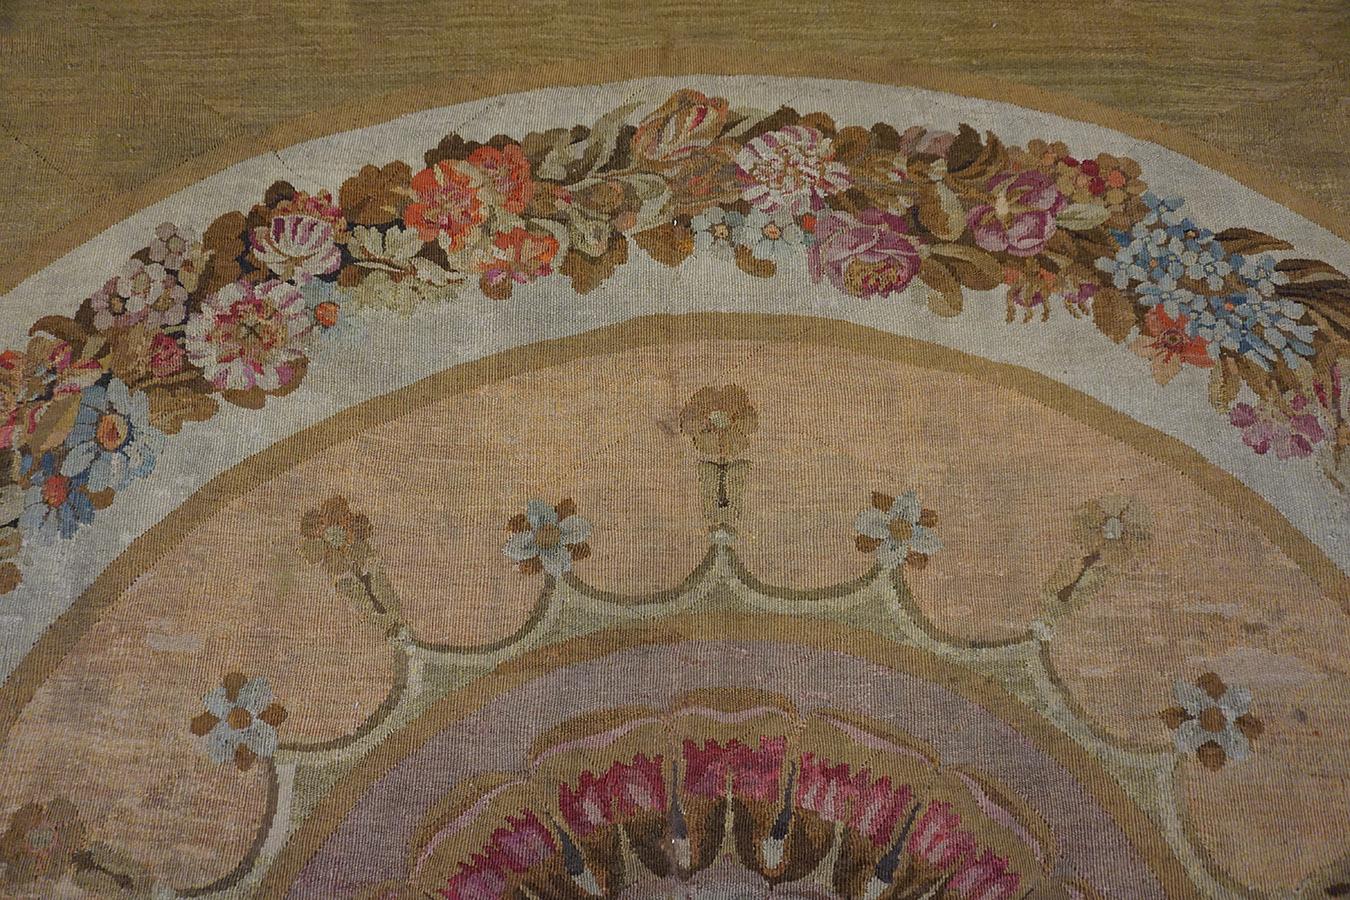 Early 19th Century French Empire Period Aubusson Carpet (13'8